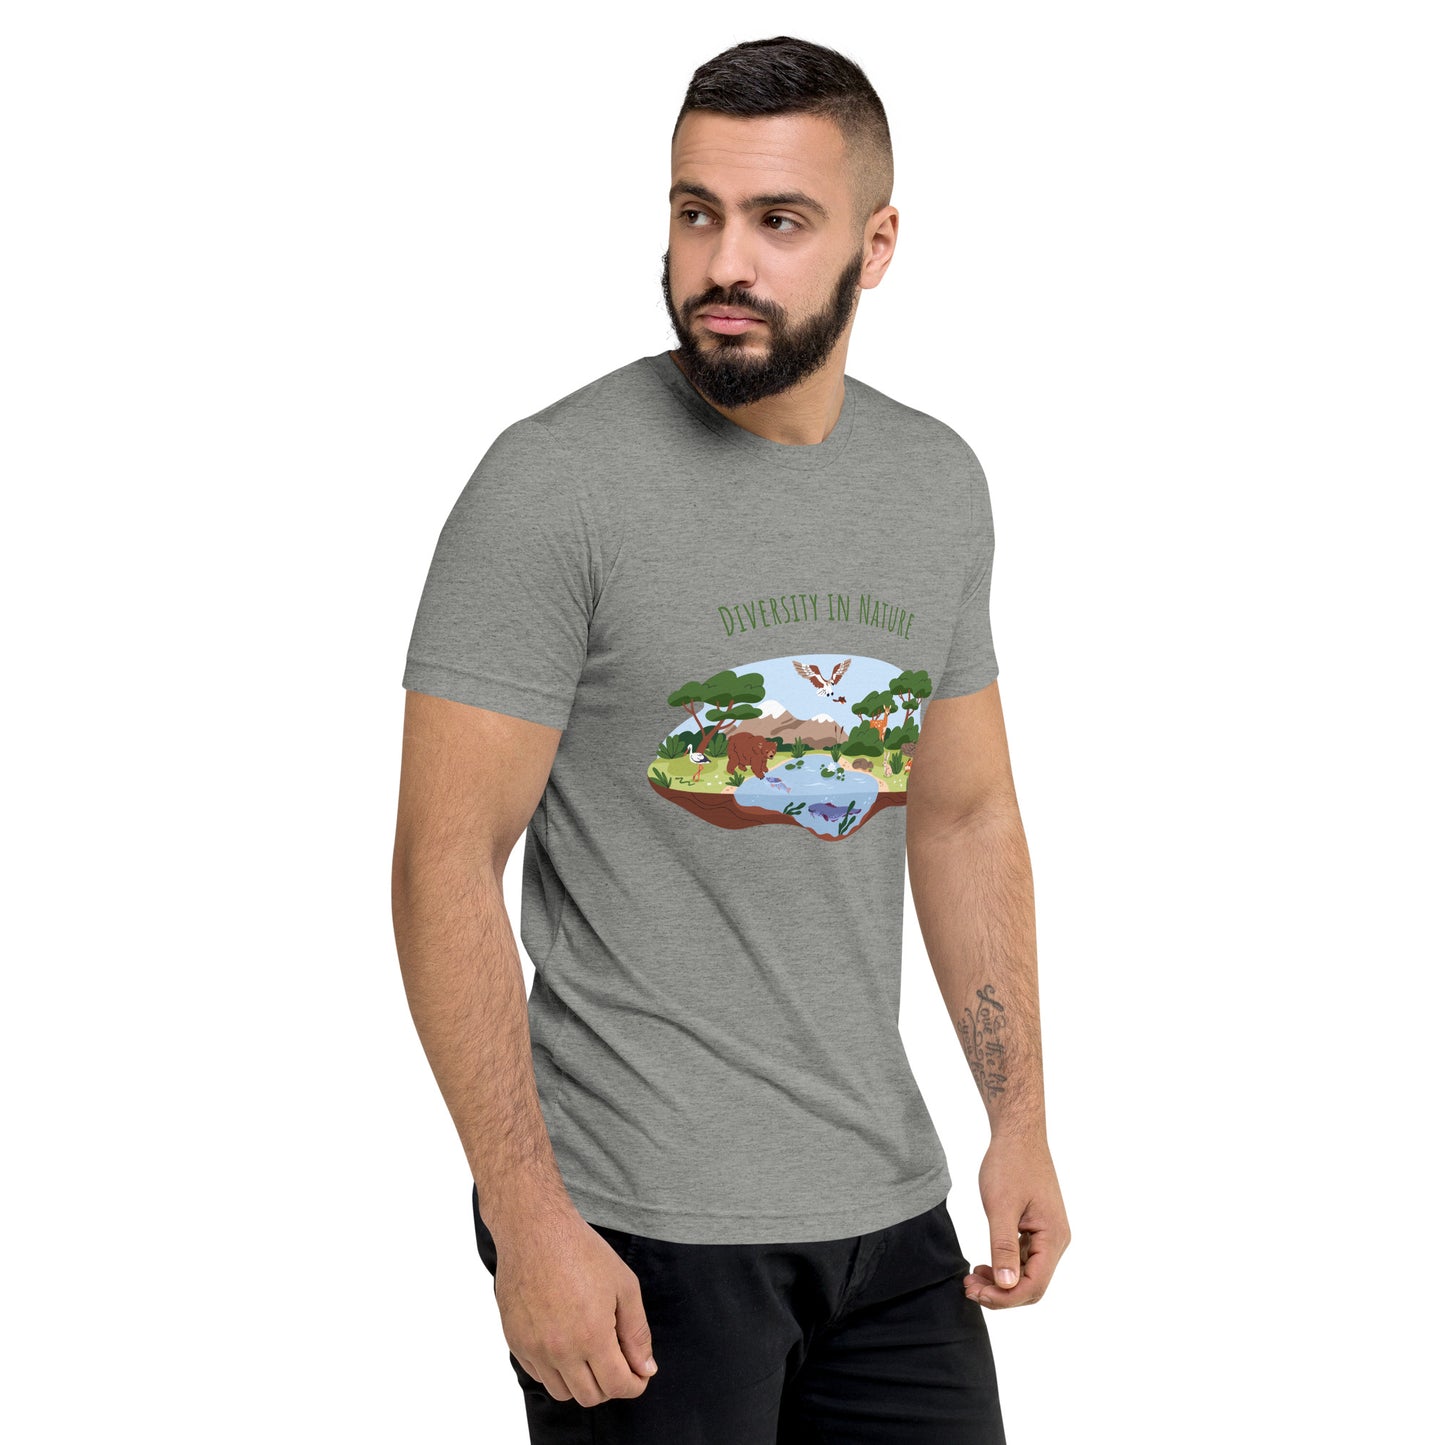 Green Chronicles, Diversity in Nature, Beauty of nature, Diversity in Nature t-shirt, Green, Earth, protect earth, Protect animals, Animals